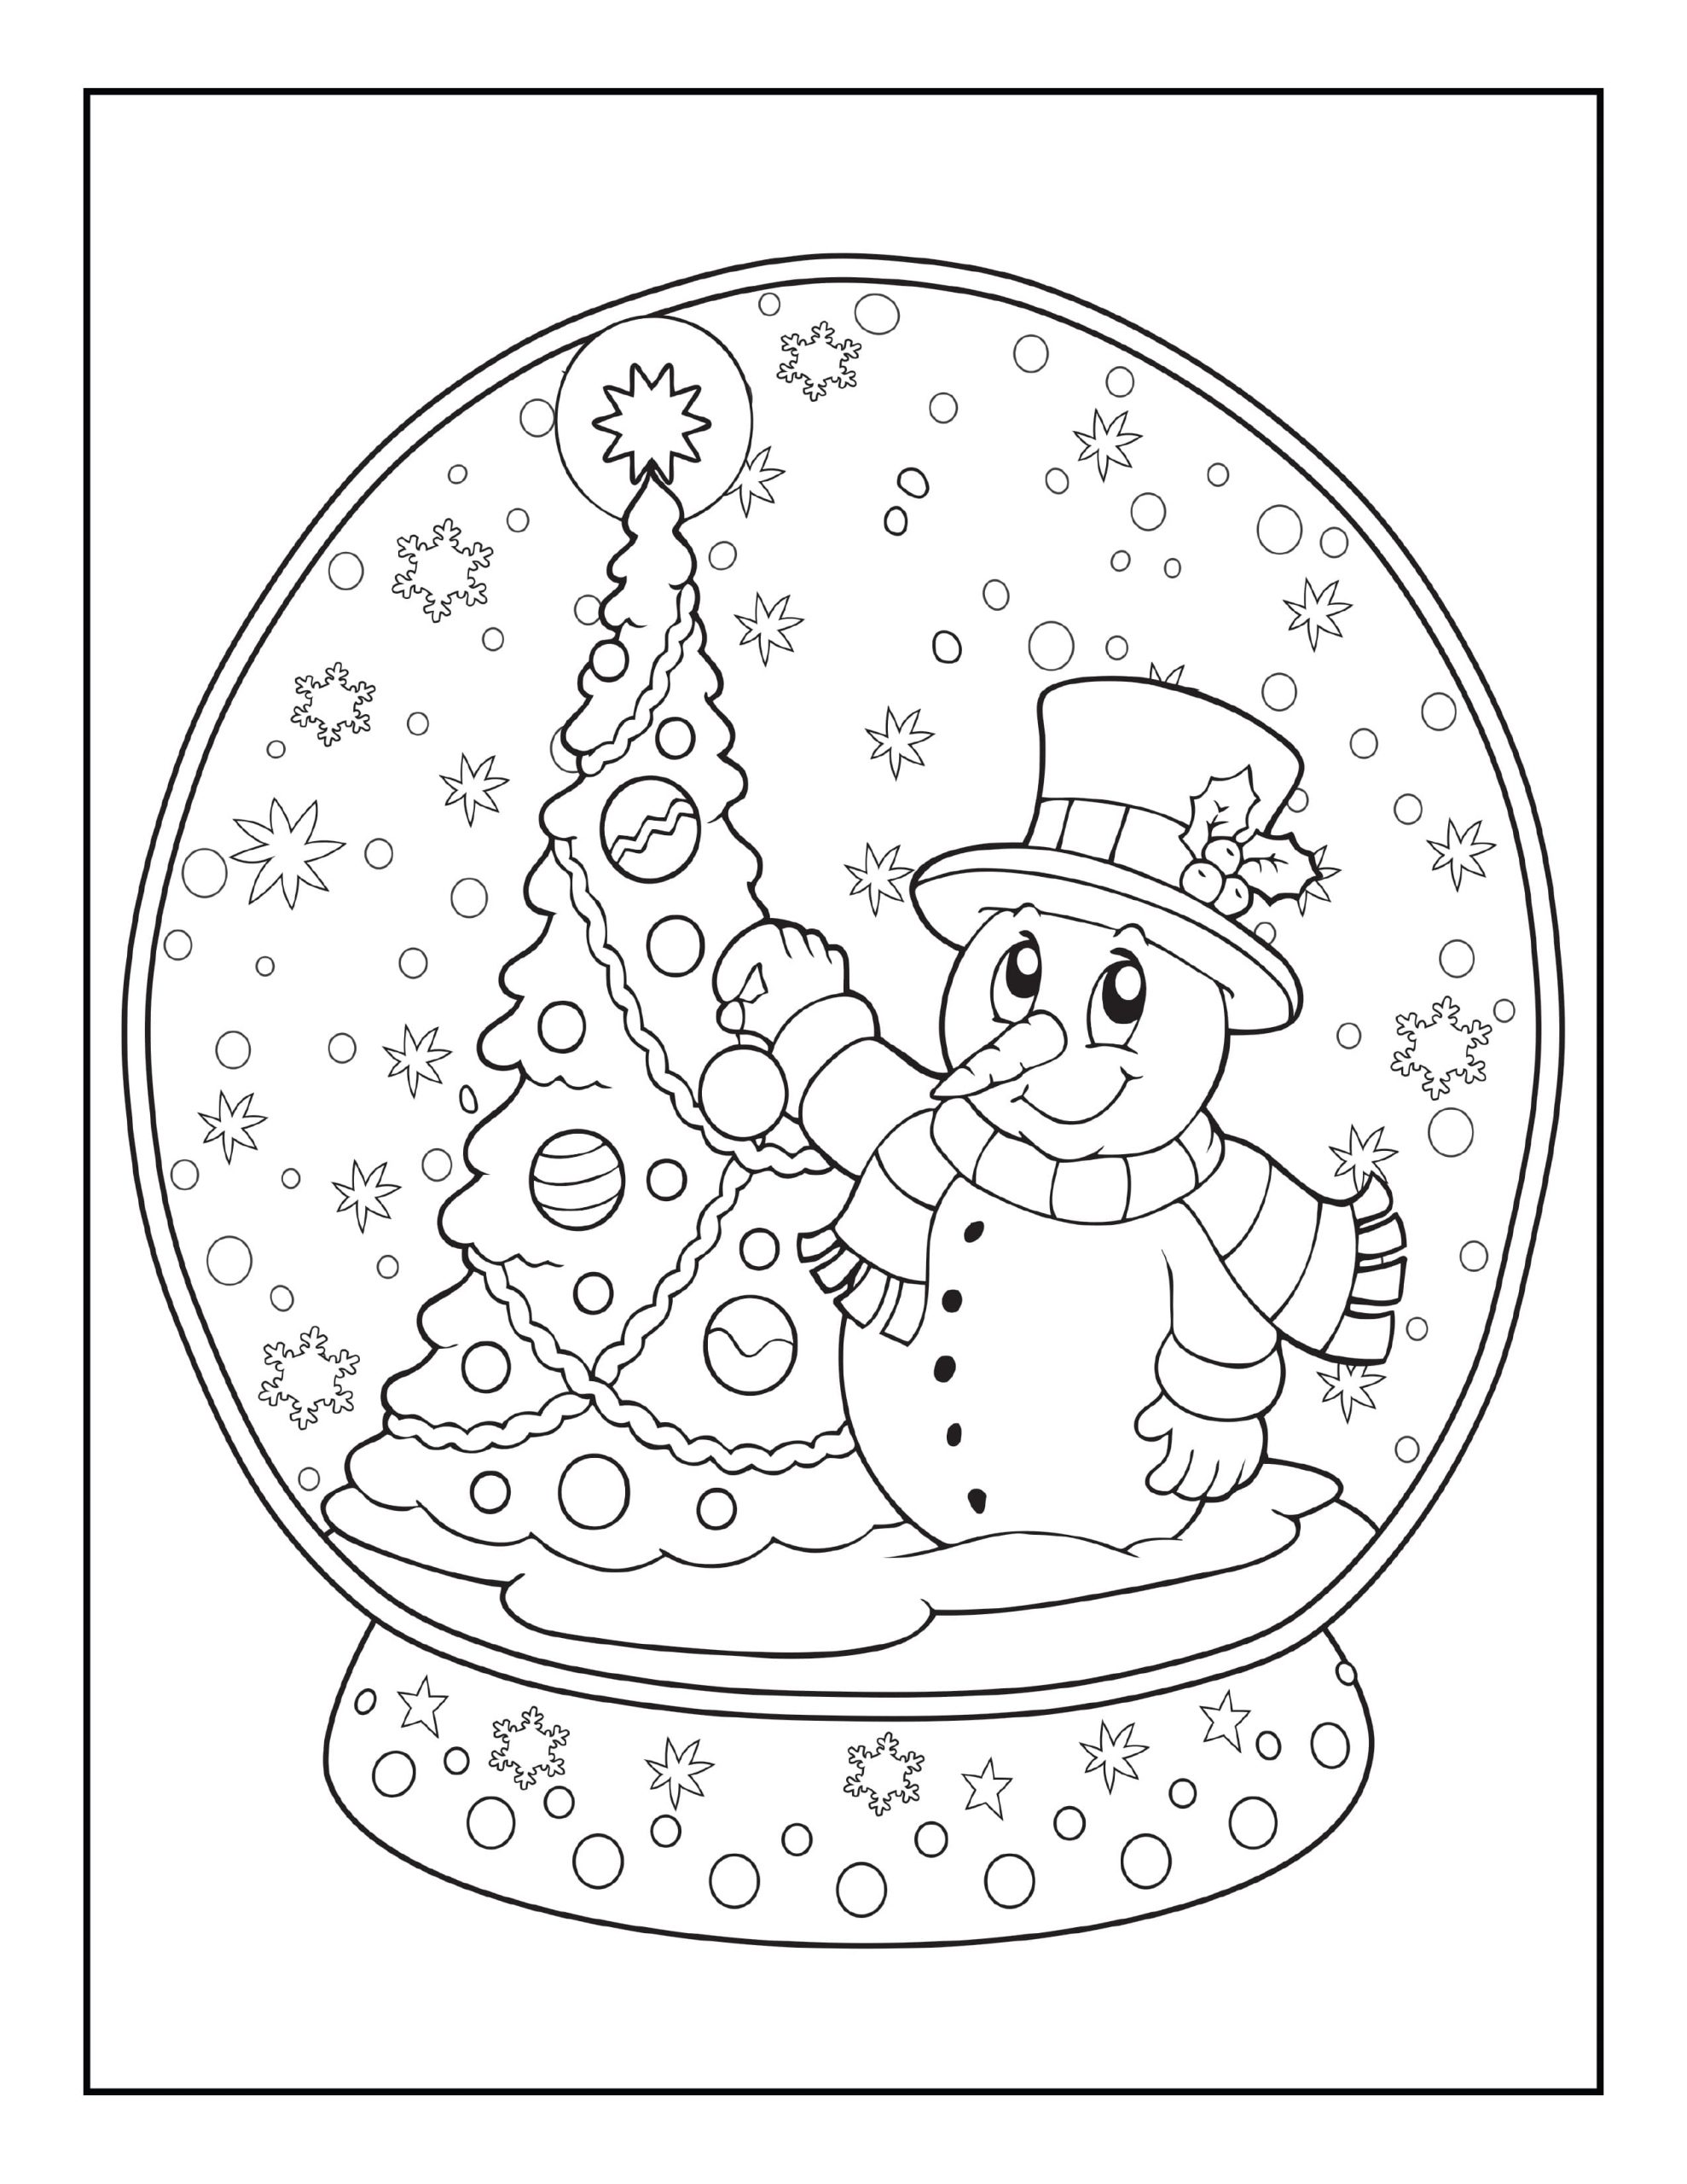 Christmas Coloring Pages For Adults   Coloring Pages   Color Pages